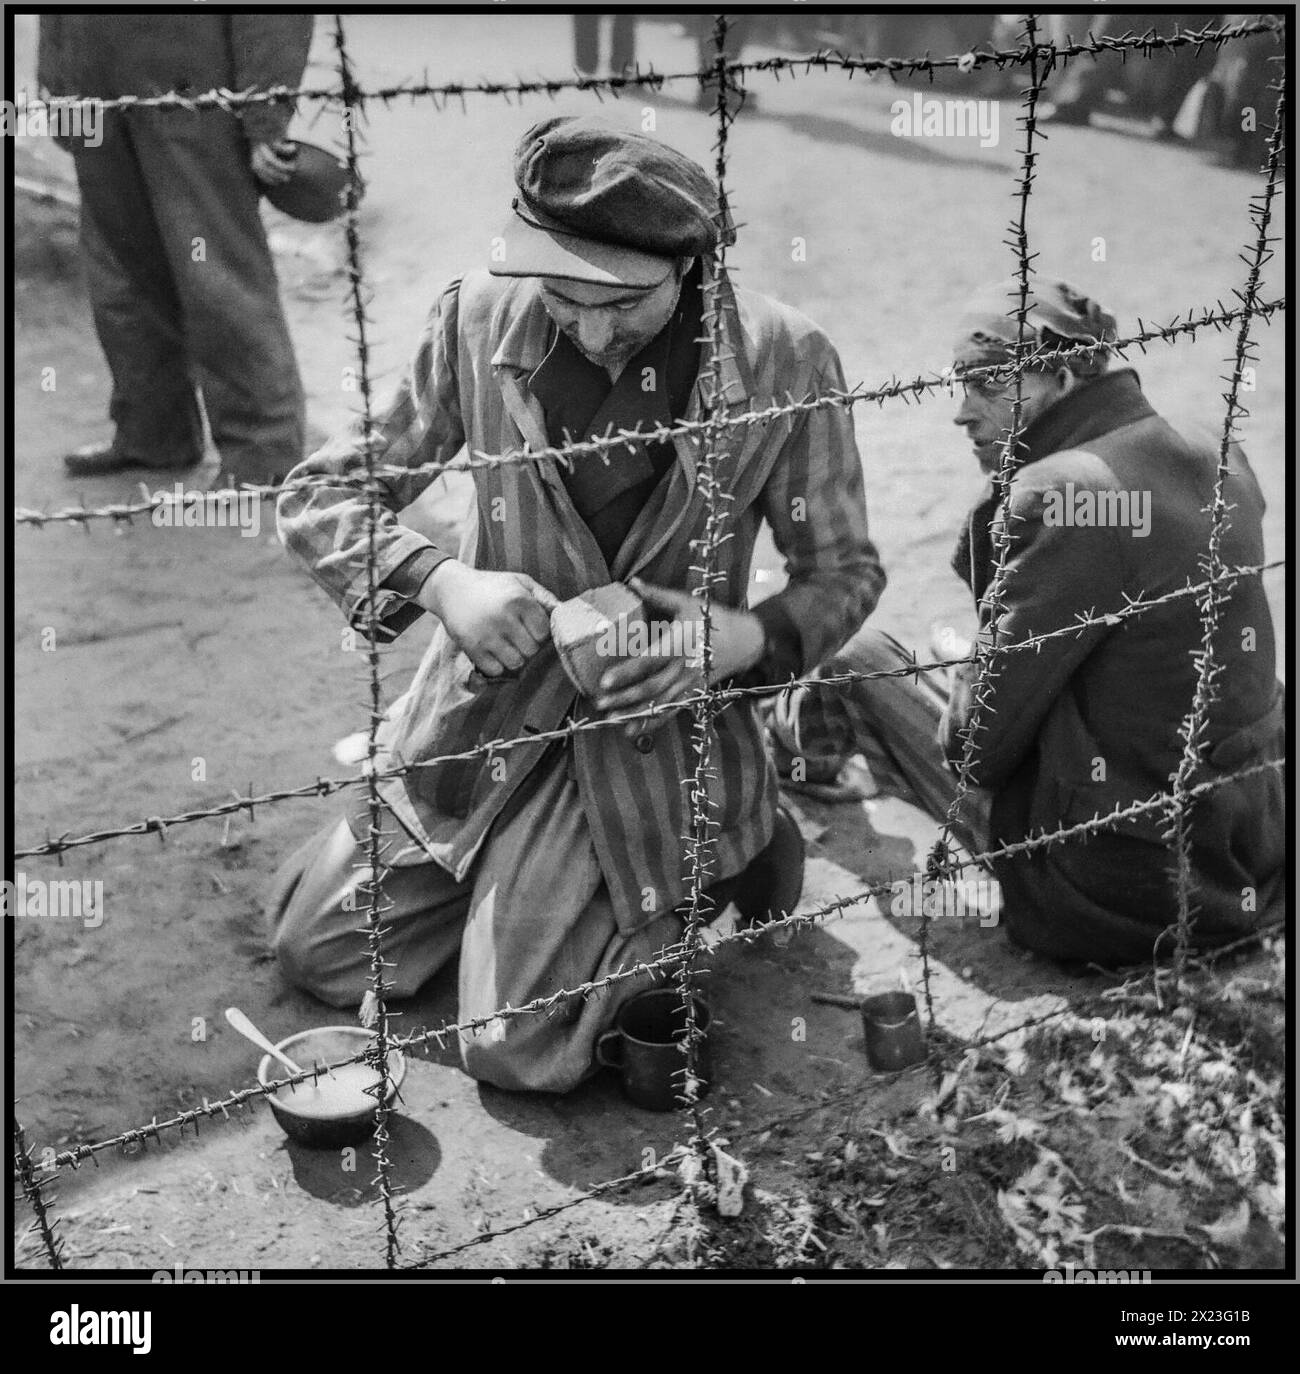 Liberation of Bergen-Belsen Concentration camp by British 11th Armoured Division, from Nazi Germany occupation April 1945 World War II Second World War WW2 with camp inmate behind barbed wire, wearing striped camp uniform, struggling with the meagre dry bread rations previously handed out by the brutal Nazi camp personnel regime. Stock Photo